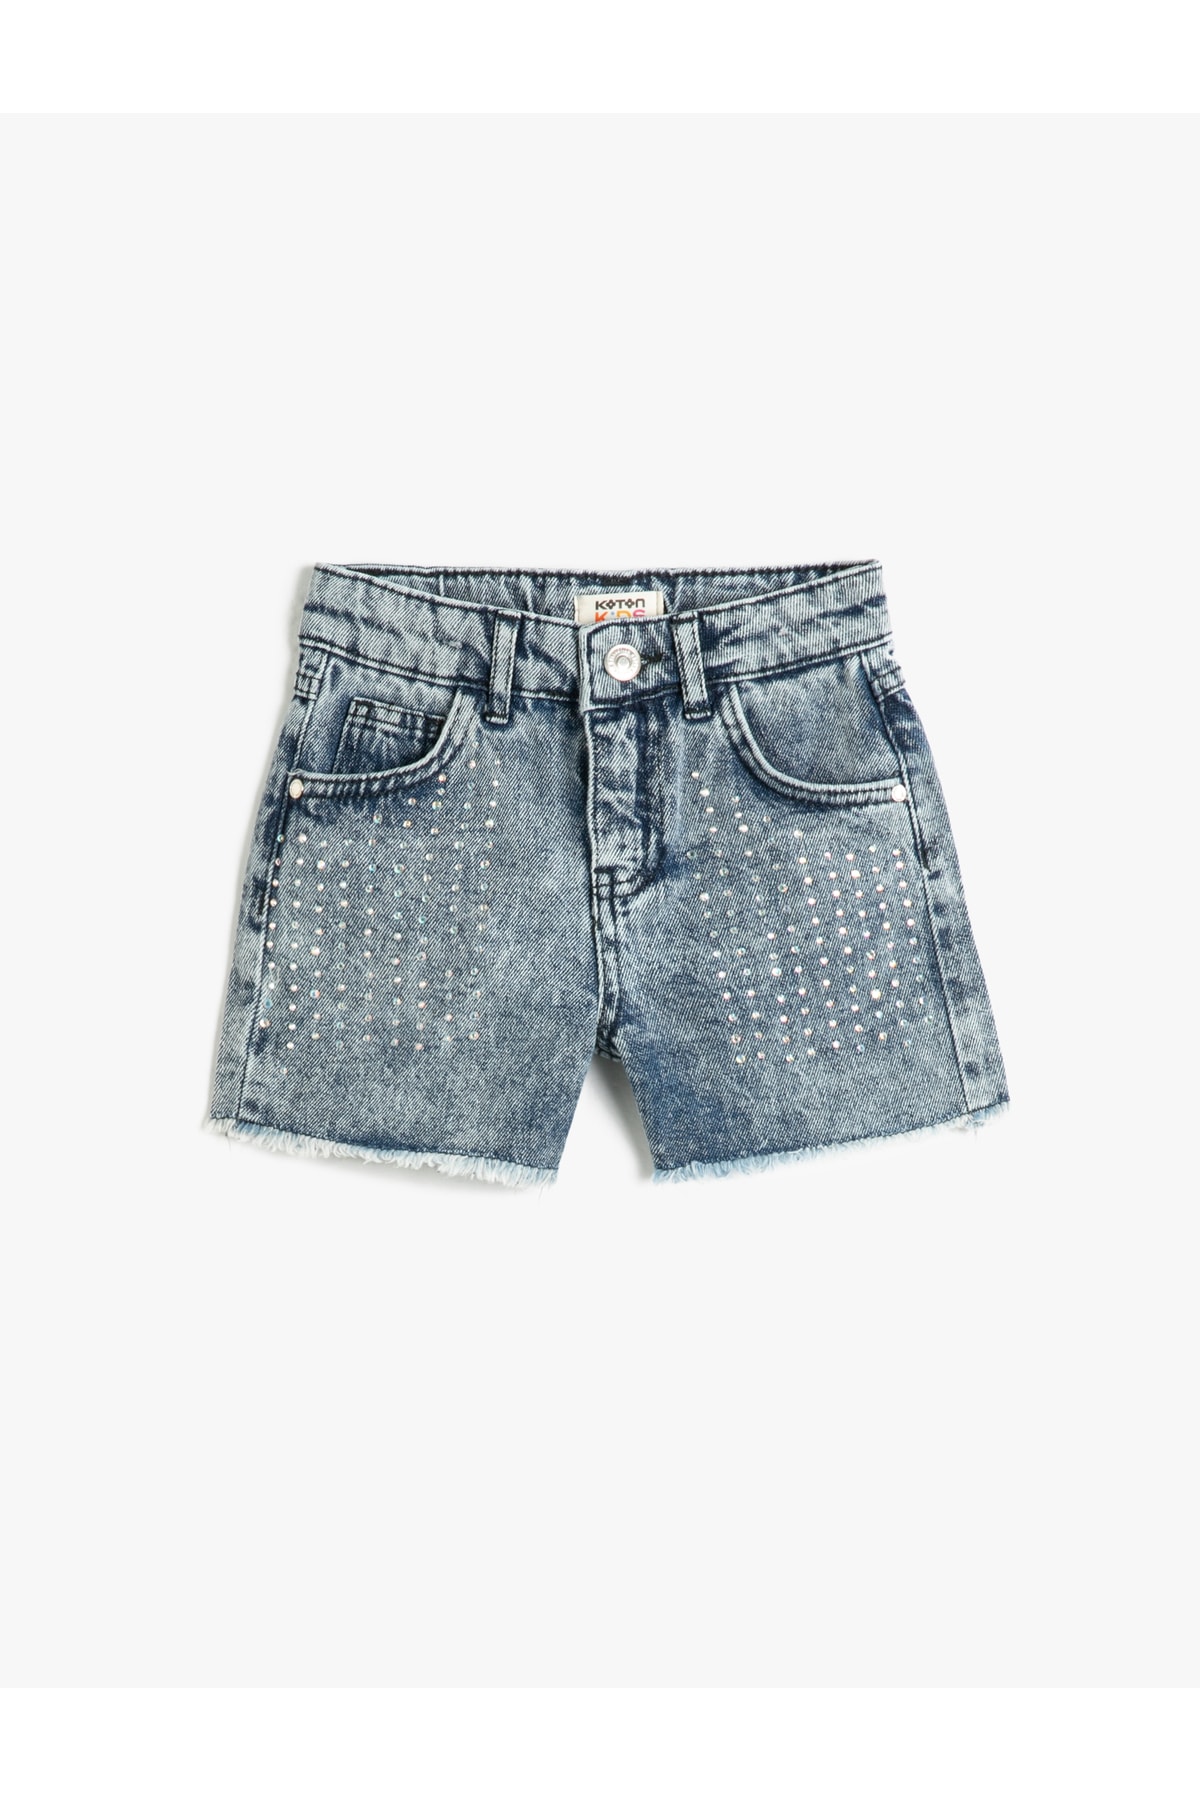 Levně Koton Denim Shorts with Embroidered Beads, Pockets, Cotton and Adjustable Elastic Waist.